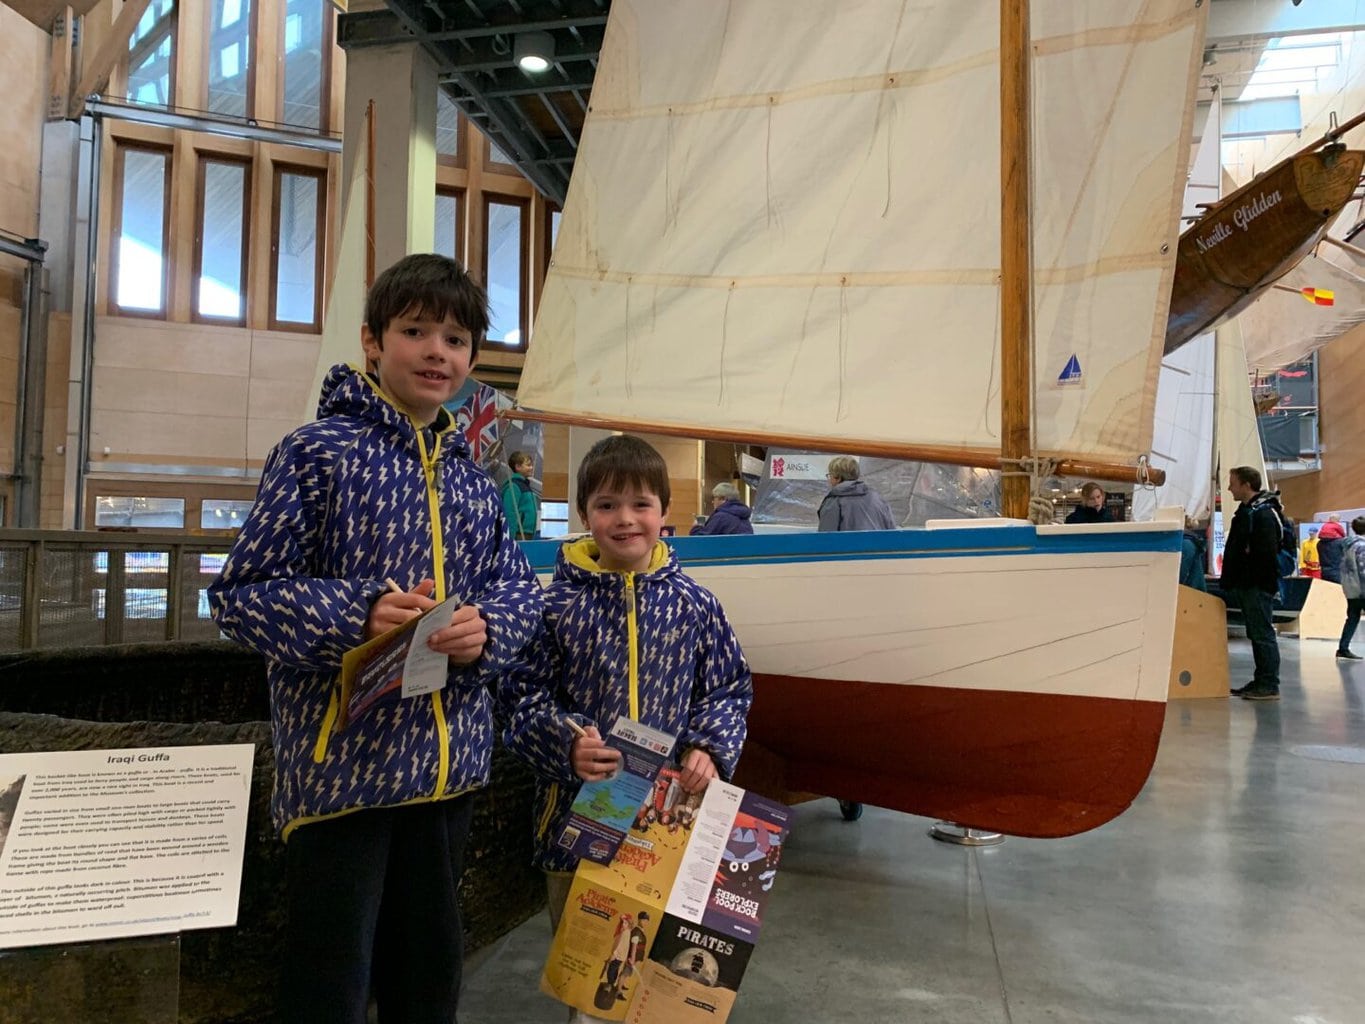 We visited the National Maritime Museum Cornwall on a very rainy day during the Easter holidays. The queue out of the door was the first indication that it was a popular family attraction!